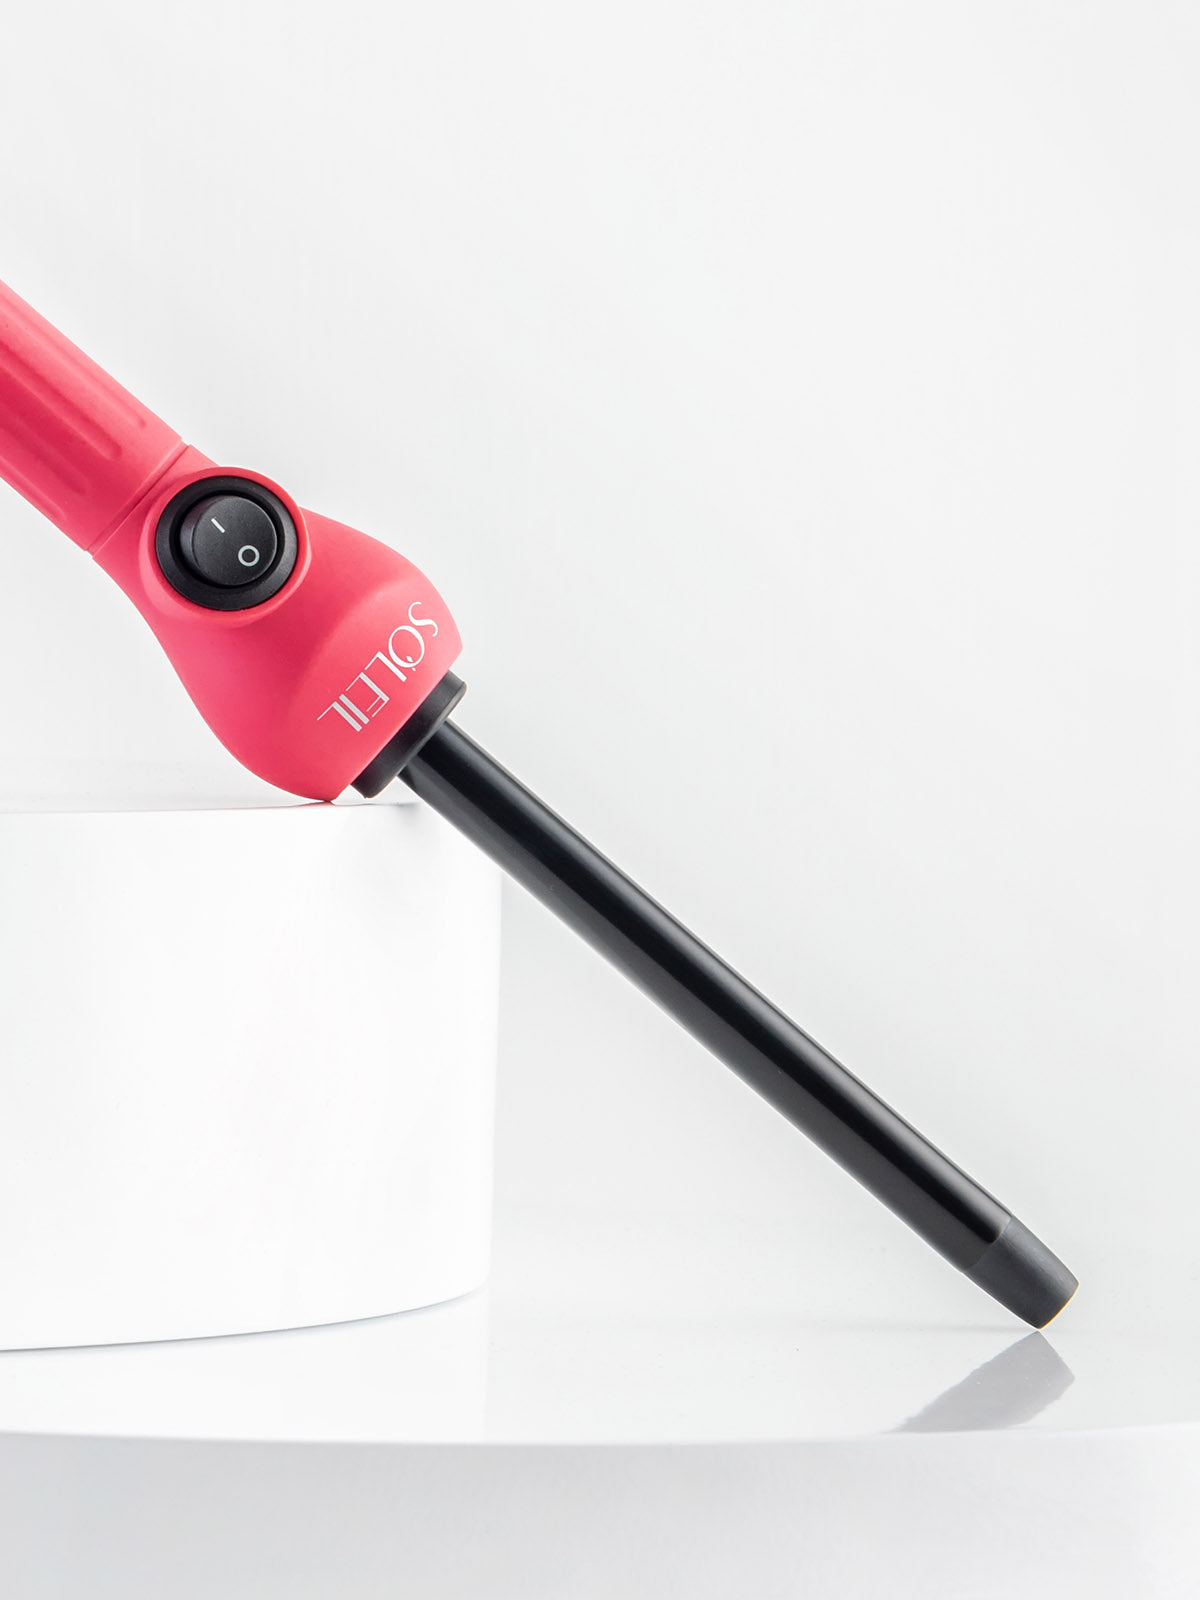 13mm curling iron